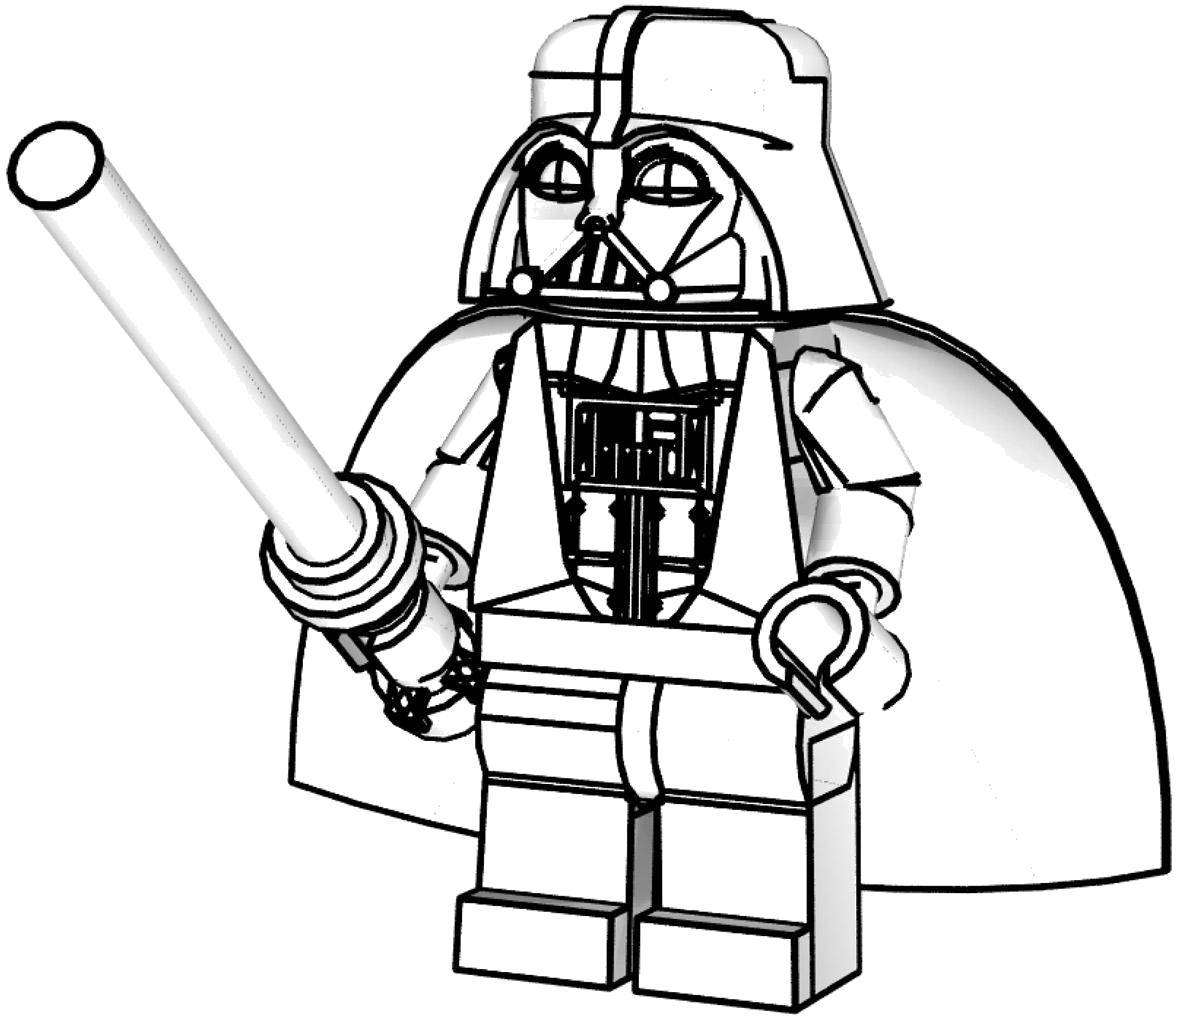 Coloring Darth Vader from star wars. Category LEGO. Tags:  Designer, LEGO.